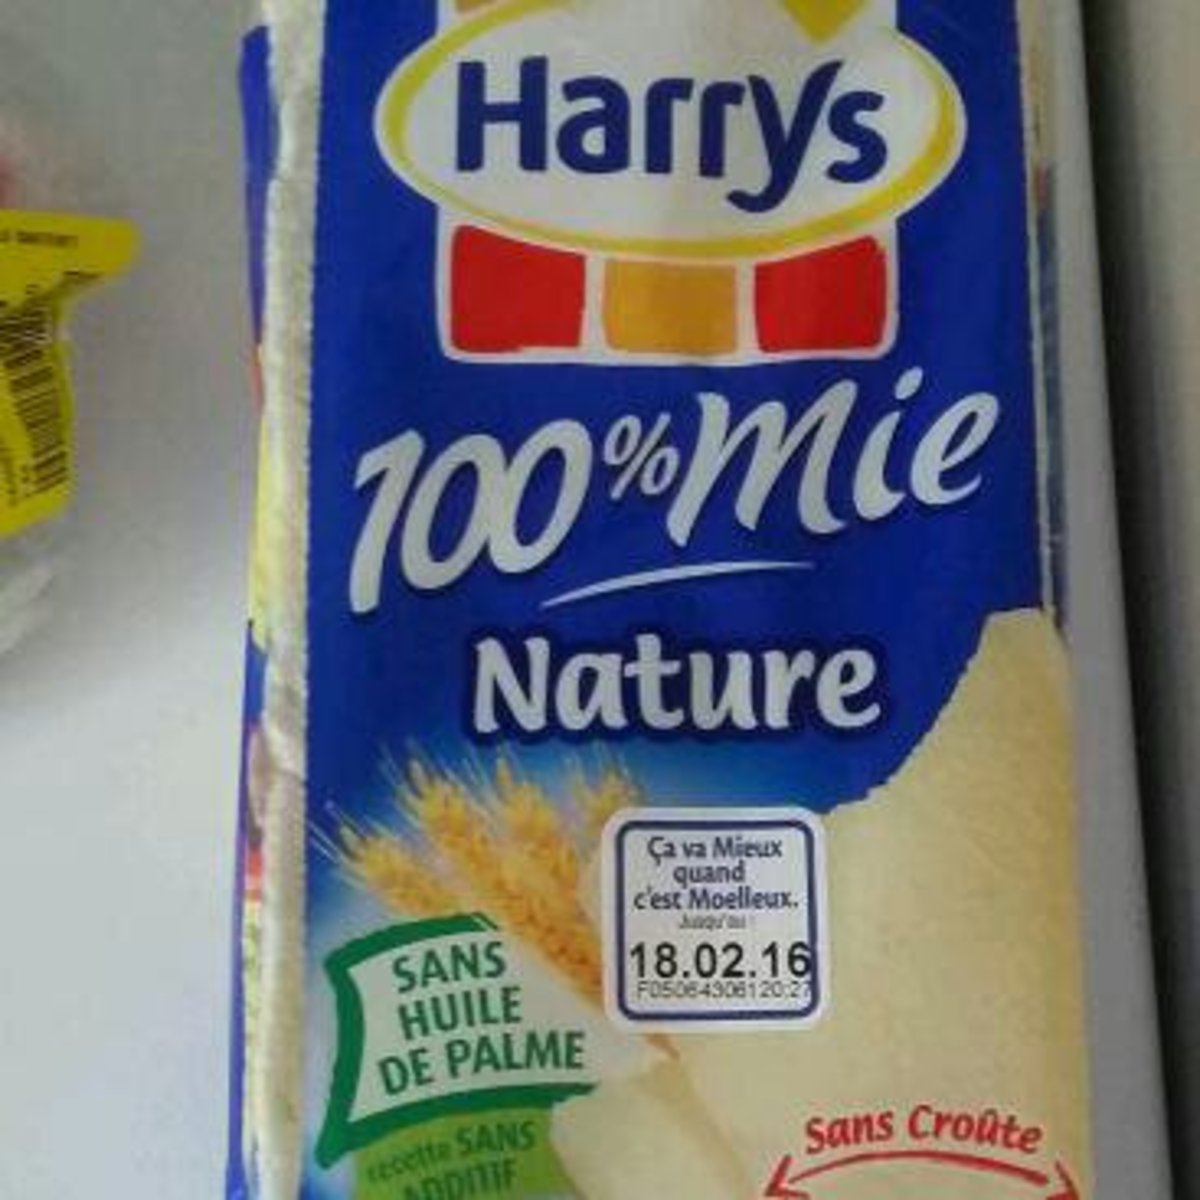 100% mie nature harrys 500g